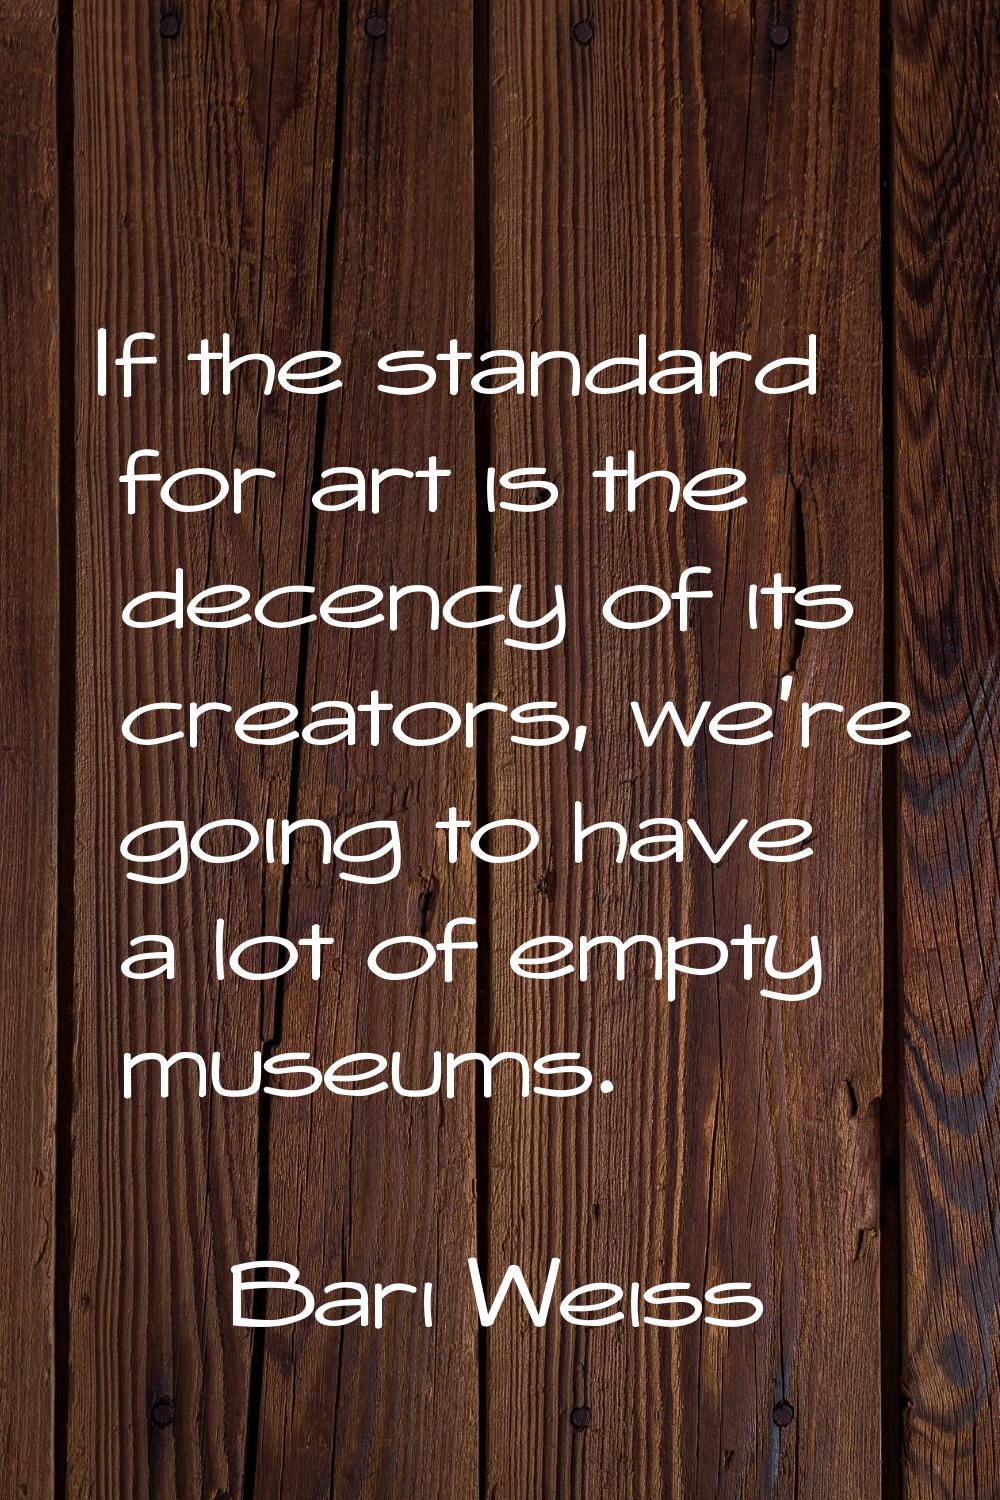 If the standard for art is the decency of its creators, we're going to have a lot of empty museums.